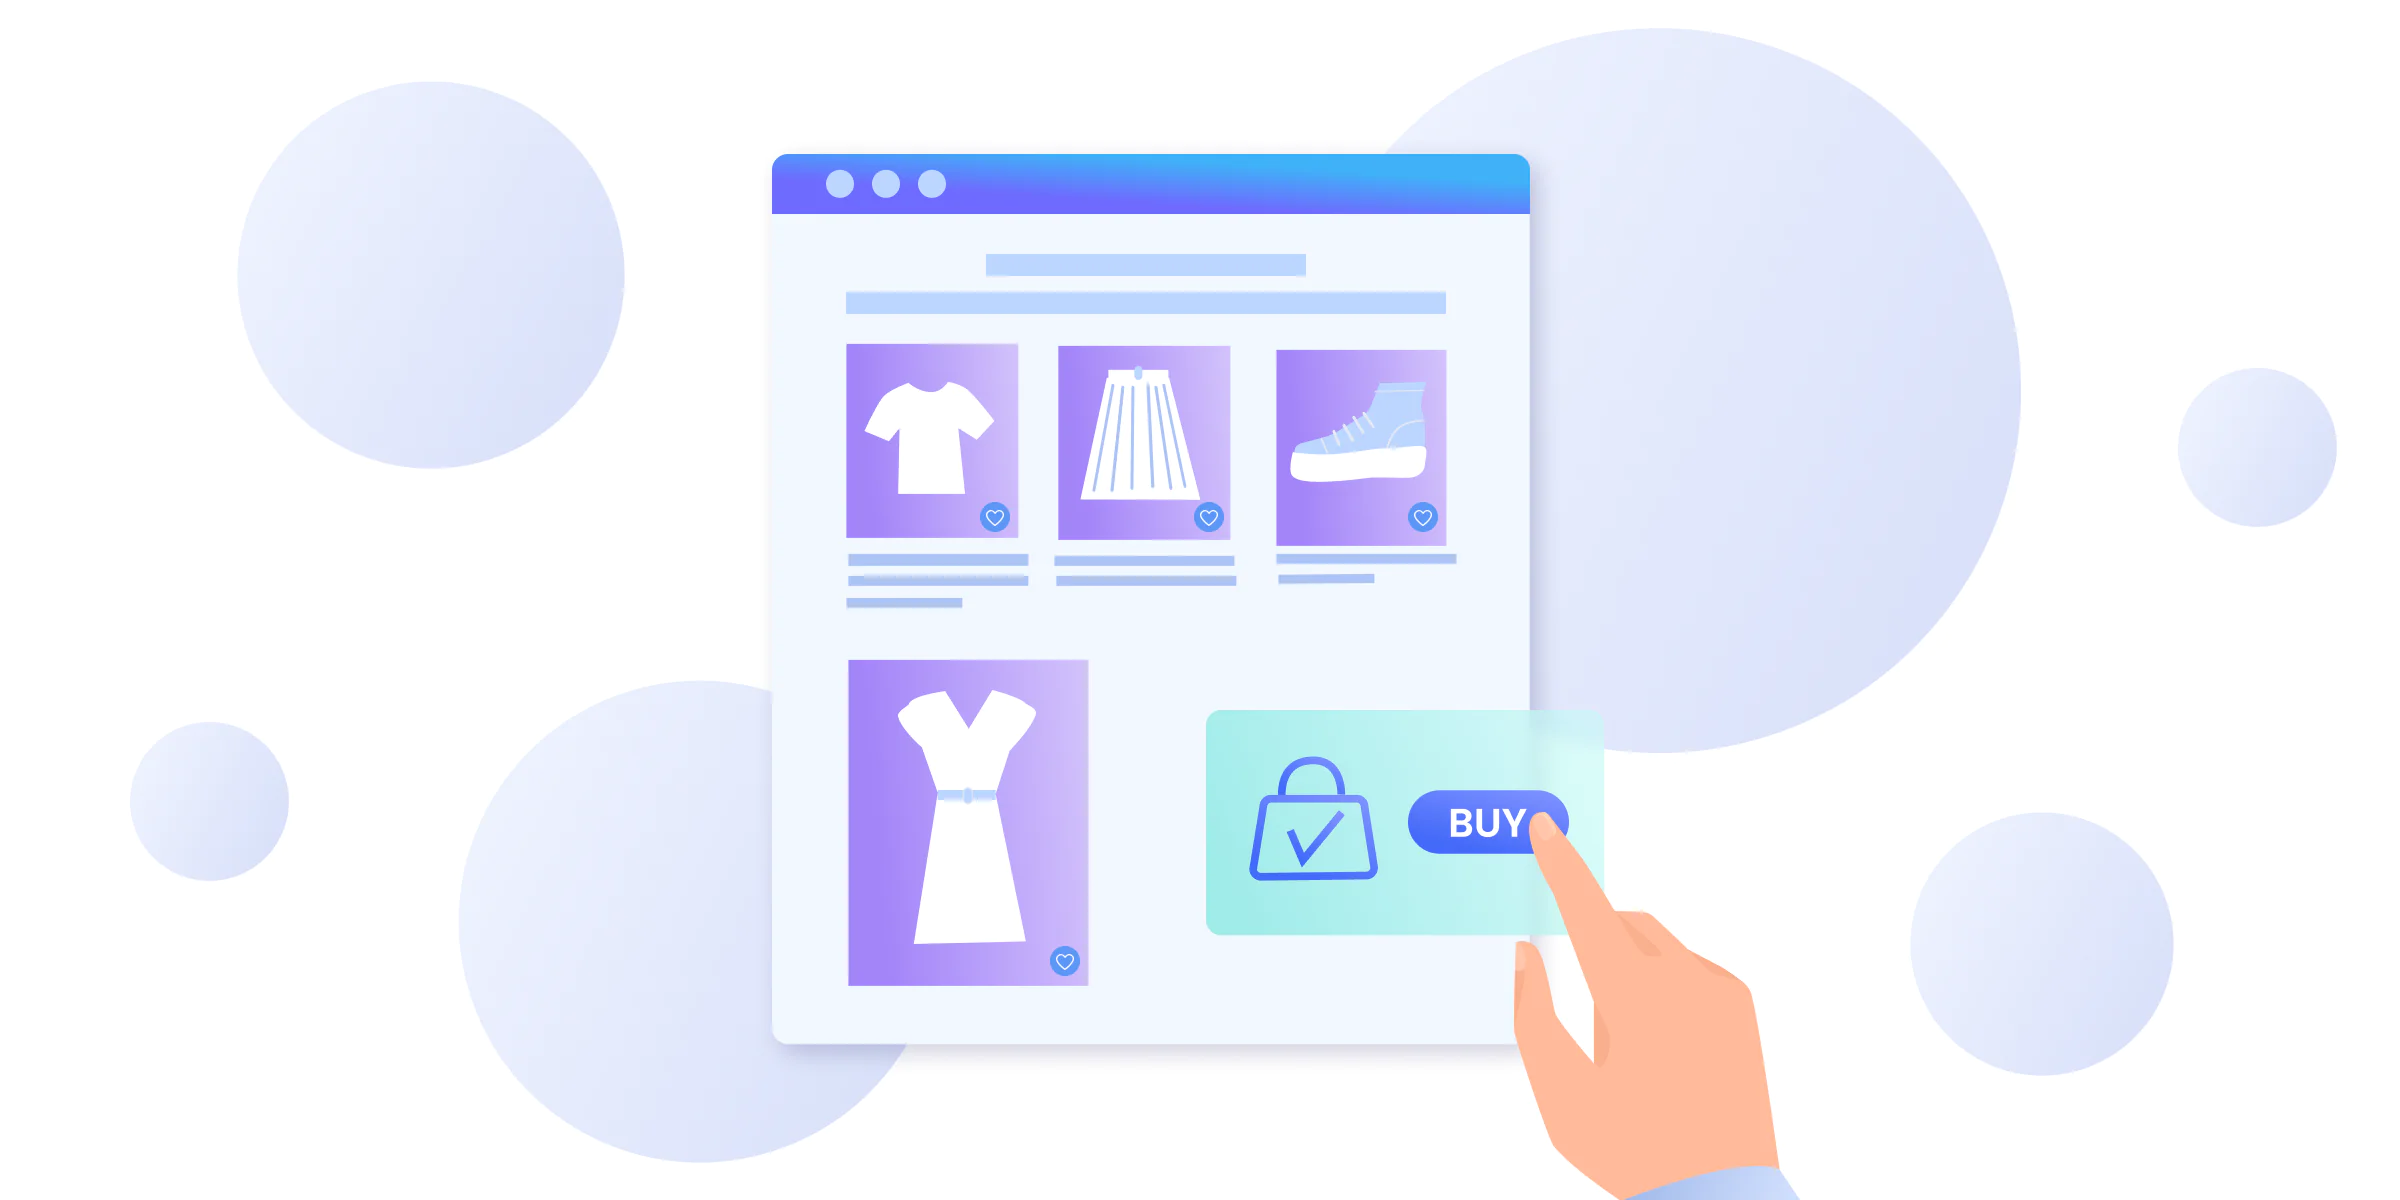 What to consider when choosing an eCommerce platform?